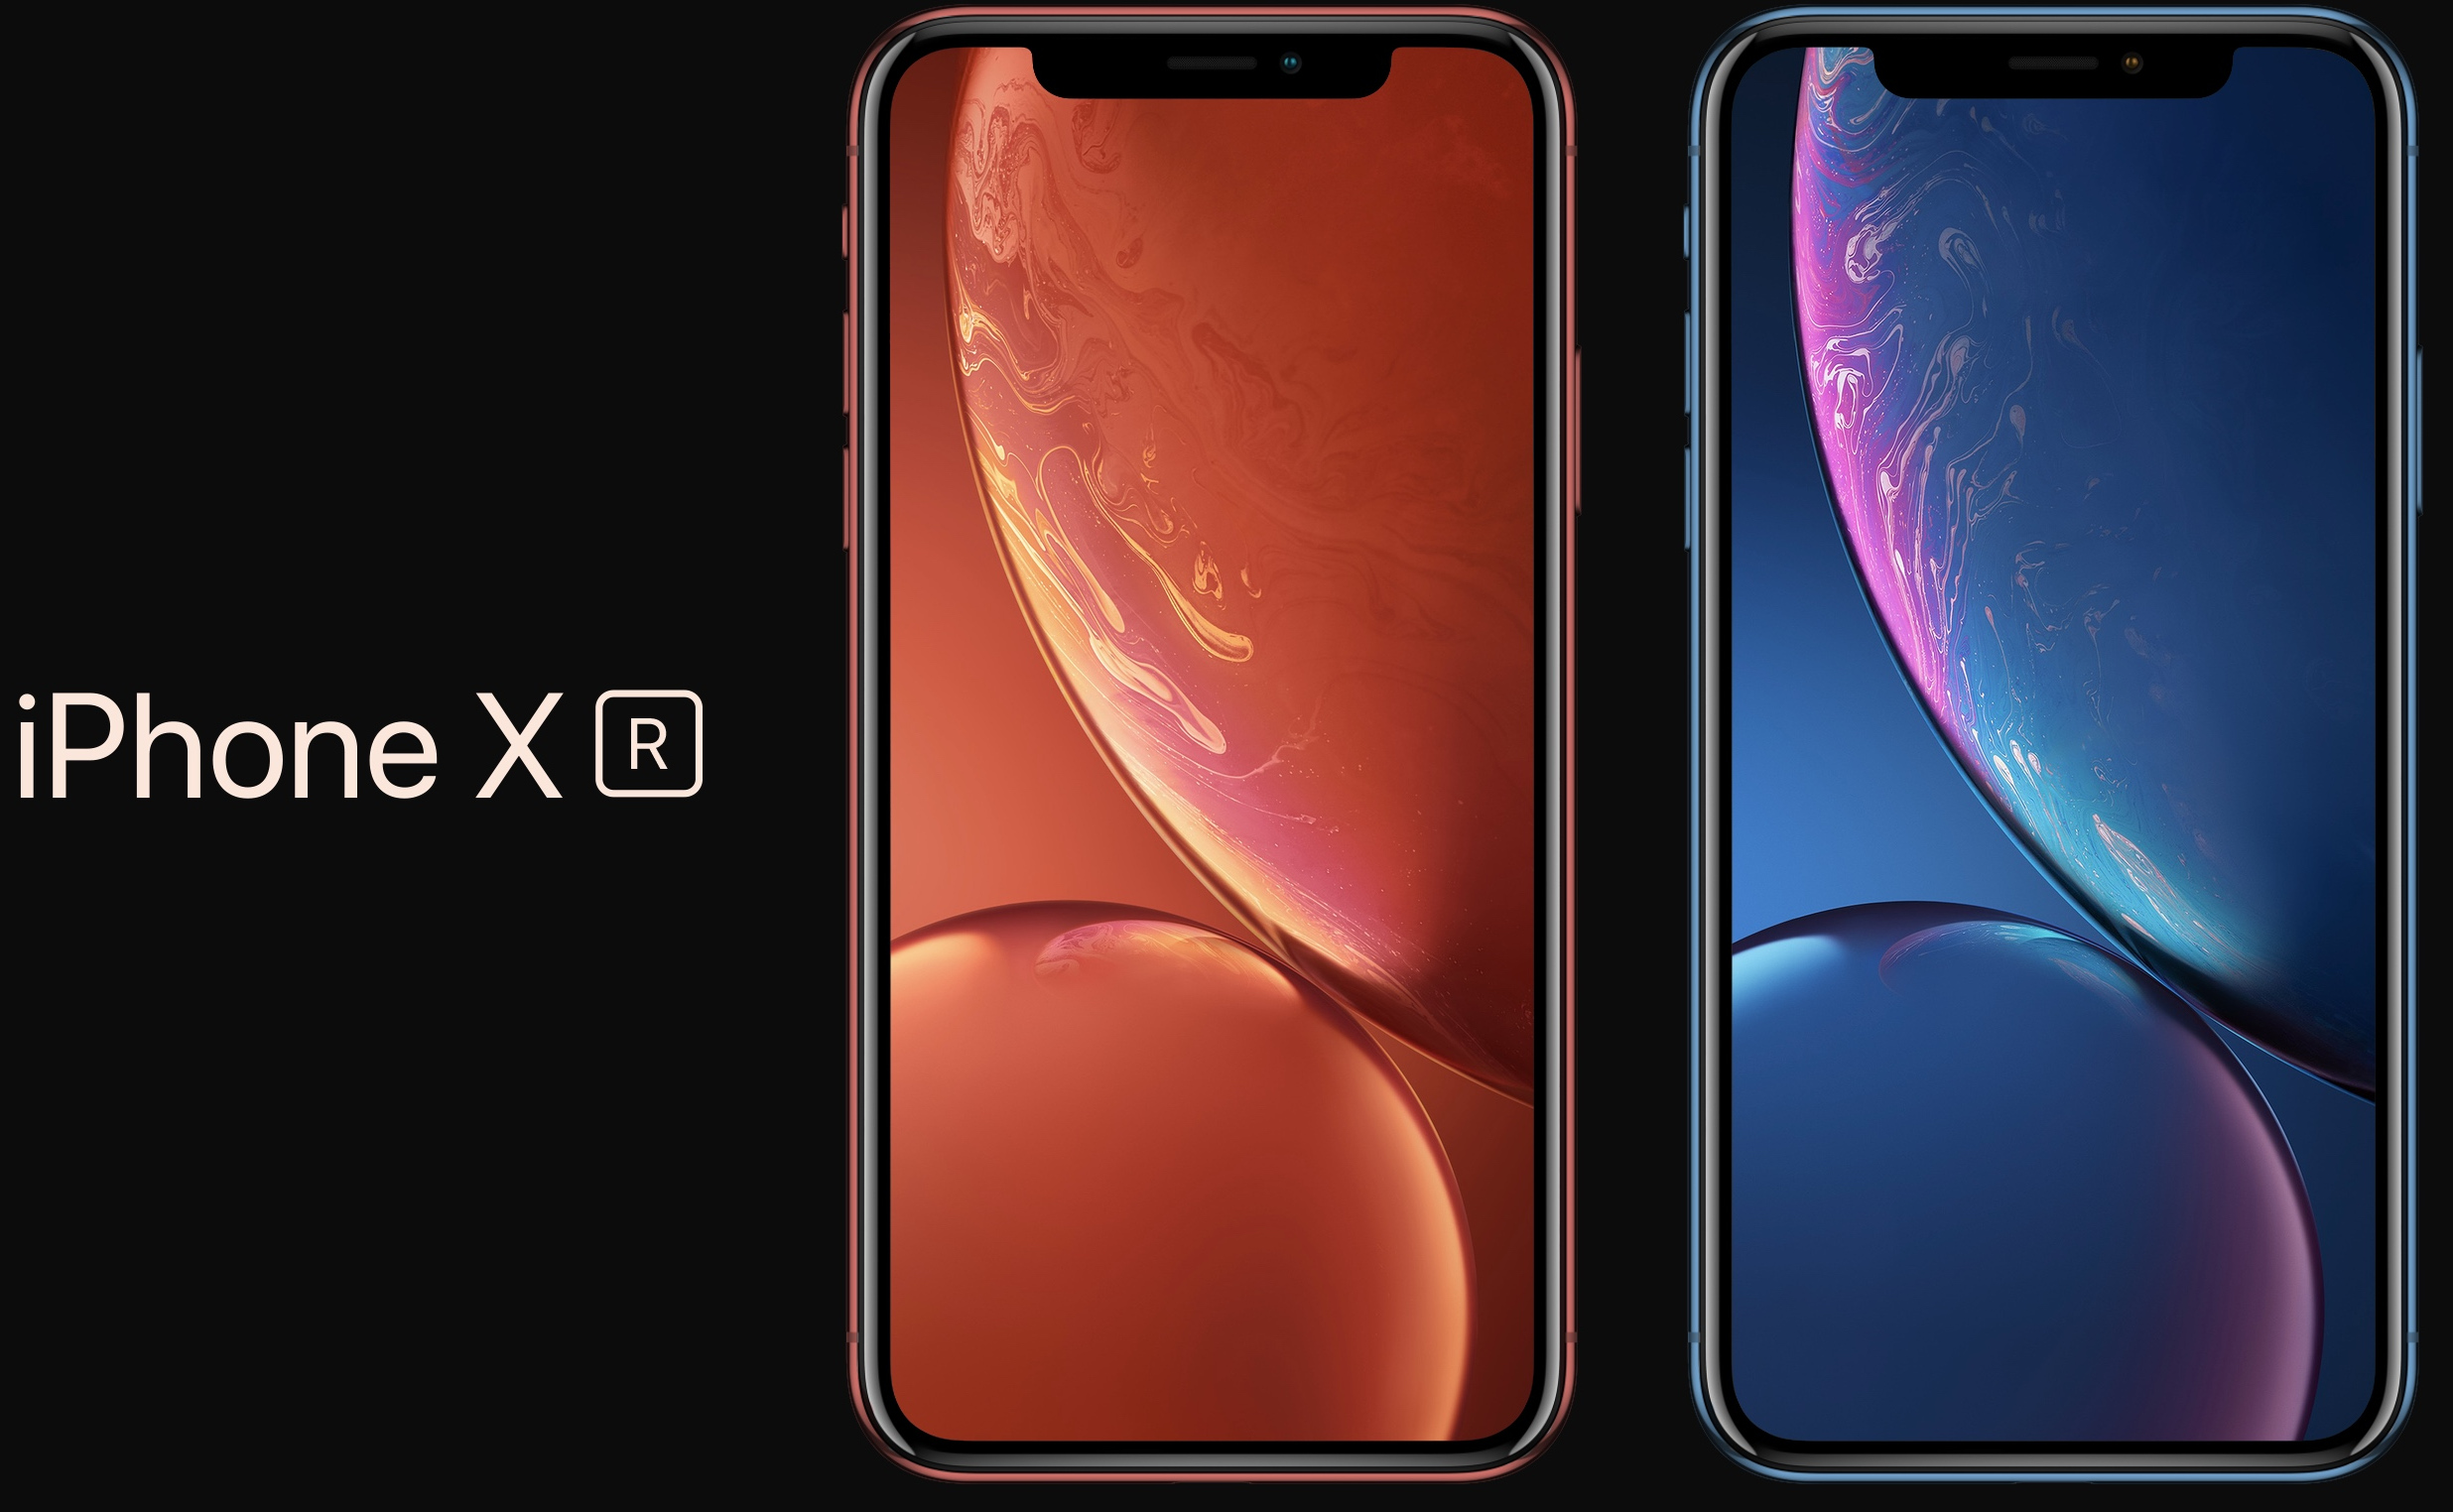 Apple Iphone XR available for Pre-Order, Starting at Rs 76,900